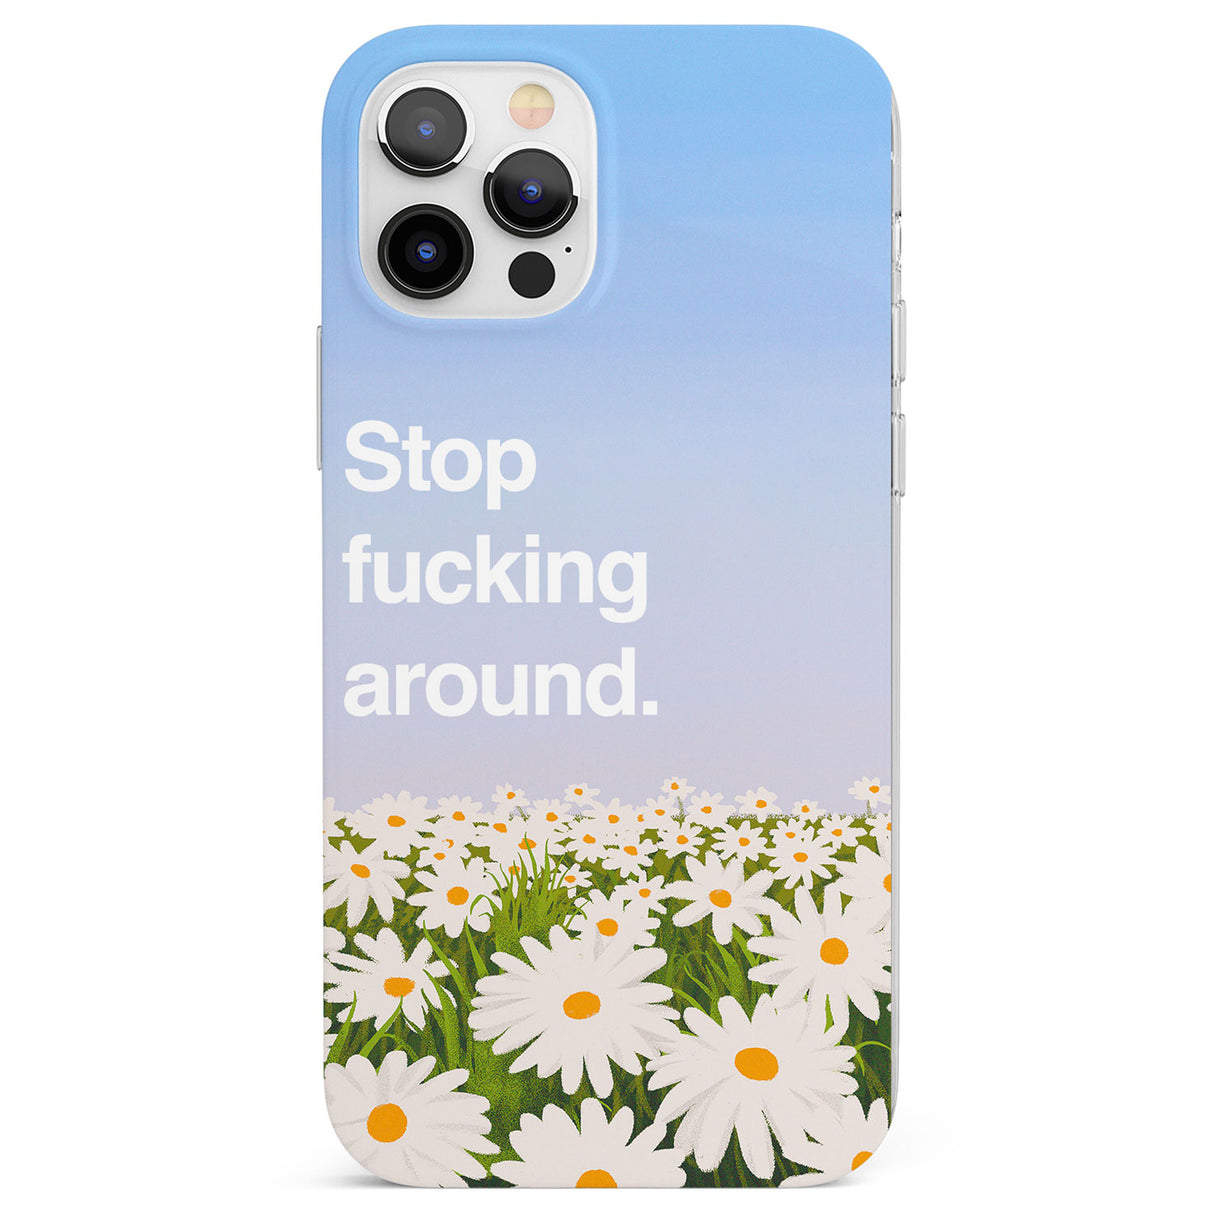 Stop fucking around Phone Case for iPhone 12 Pro